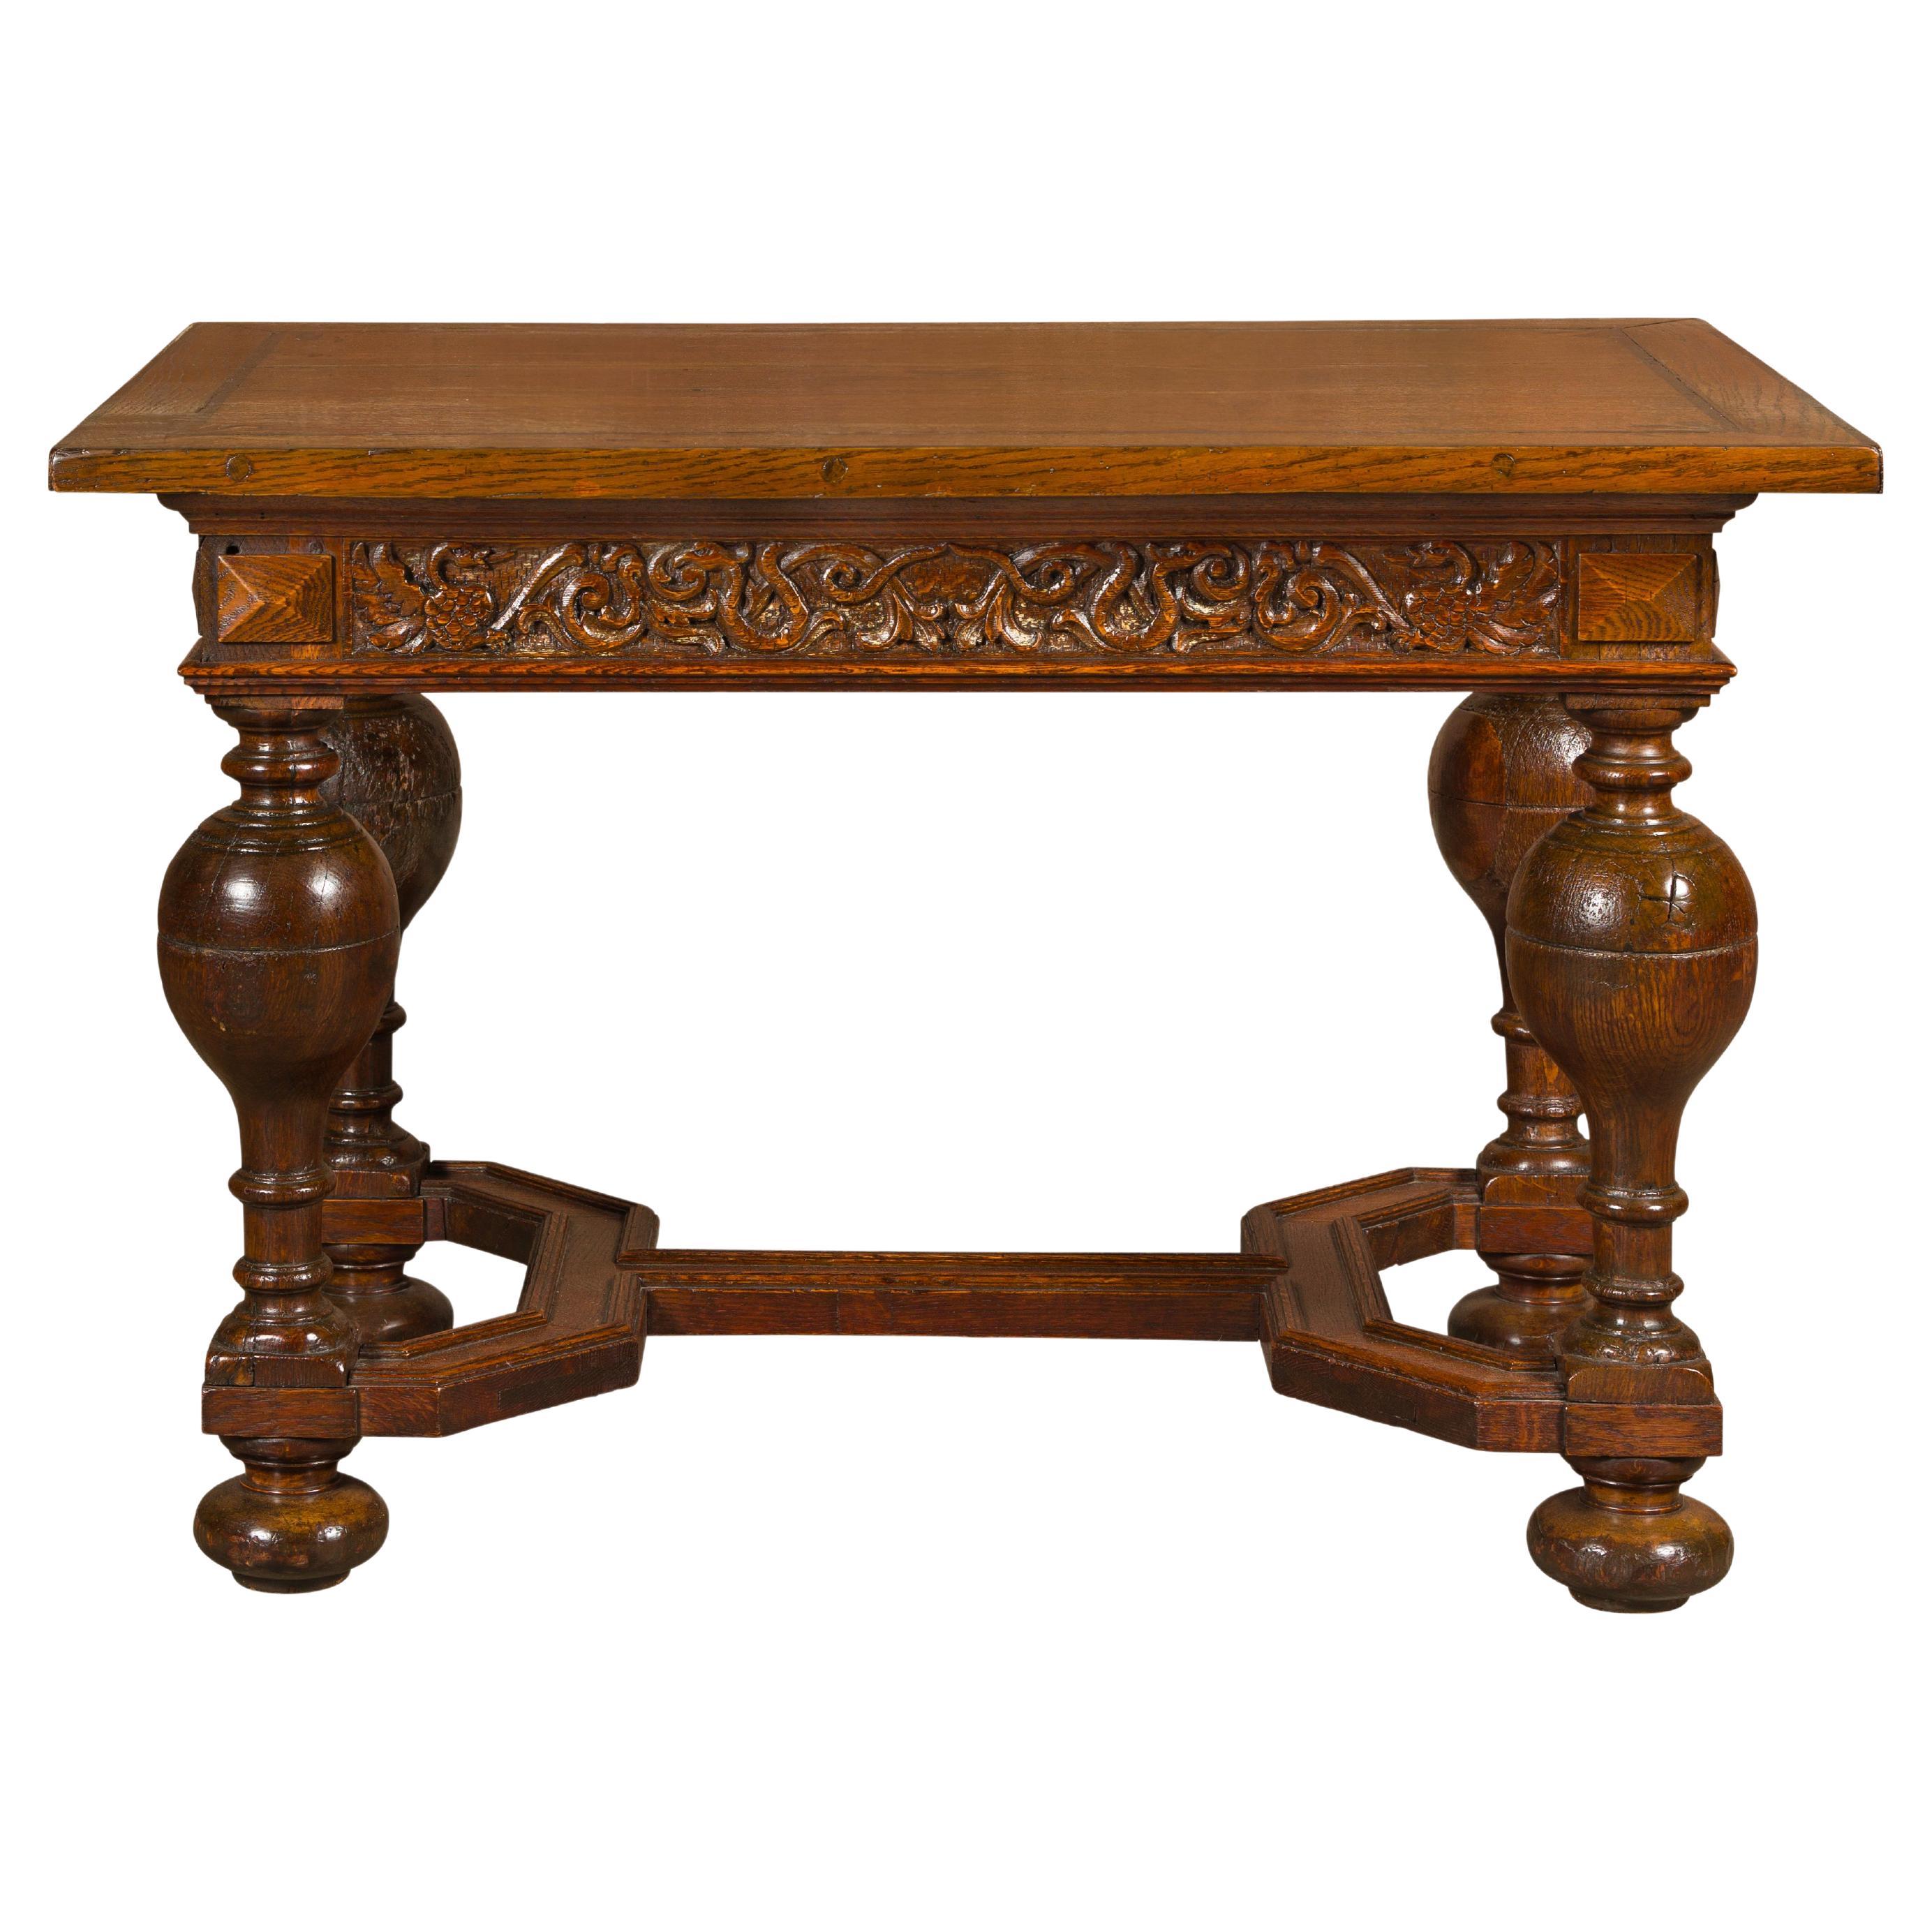 English 19th Century Oak Table with Carved Apron and Turned Baluster Legs